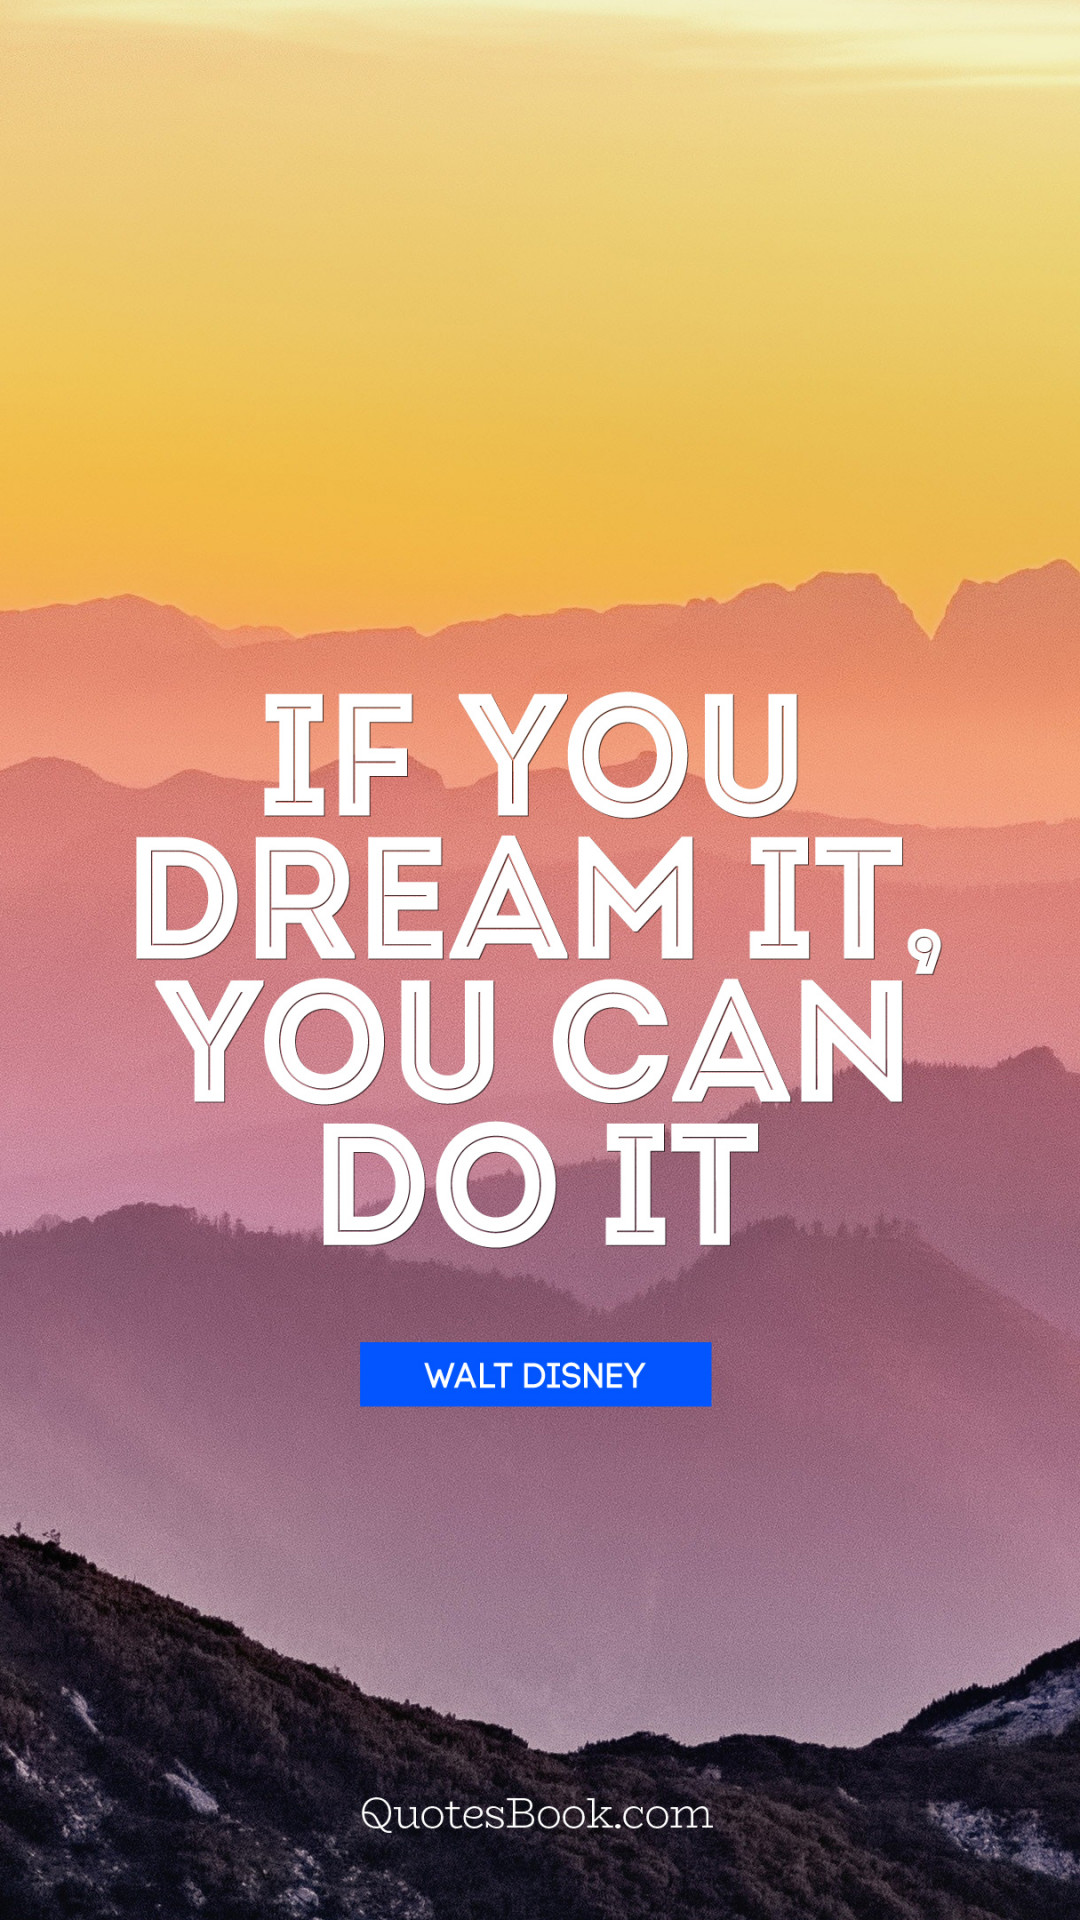 If you dream it, you can do it. - Quote by Walt Disney - QuotesBook